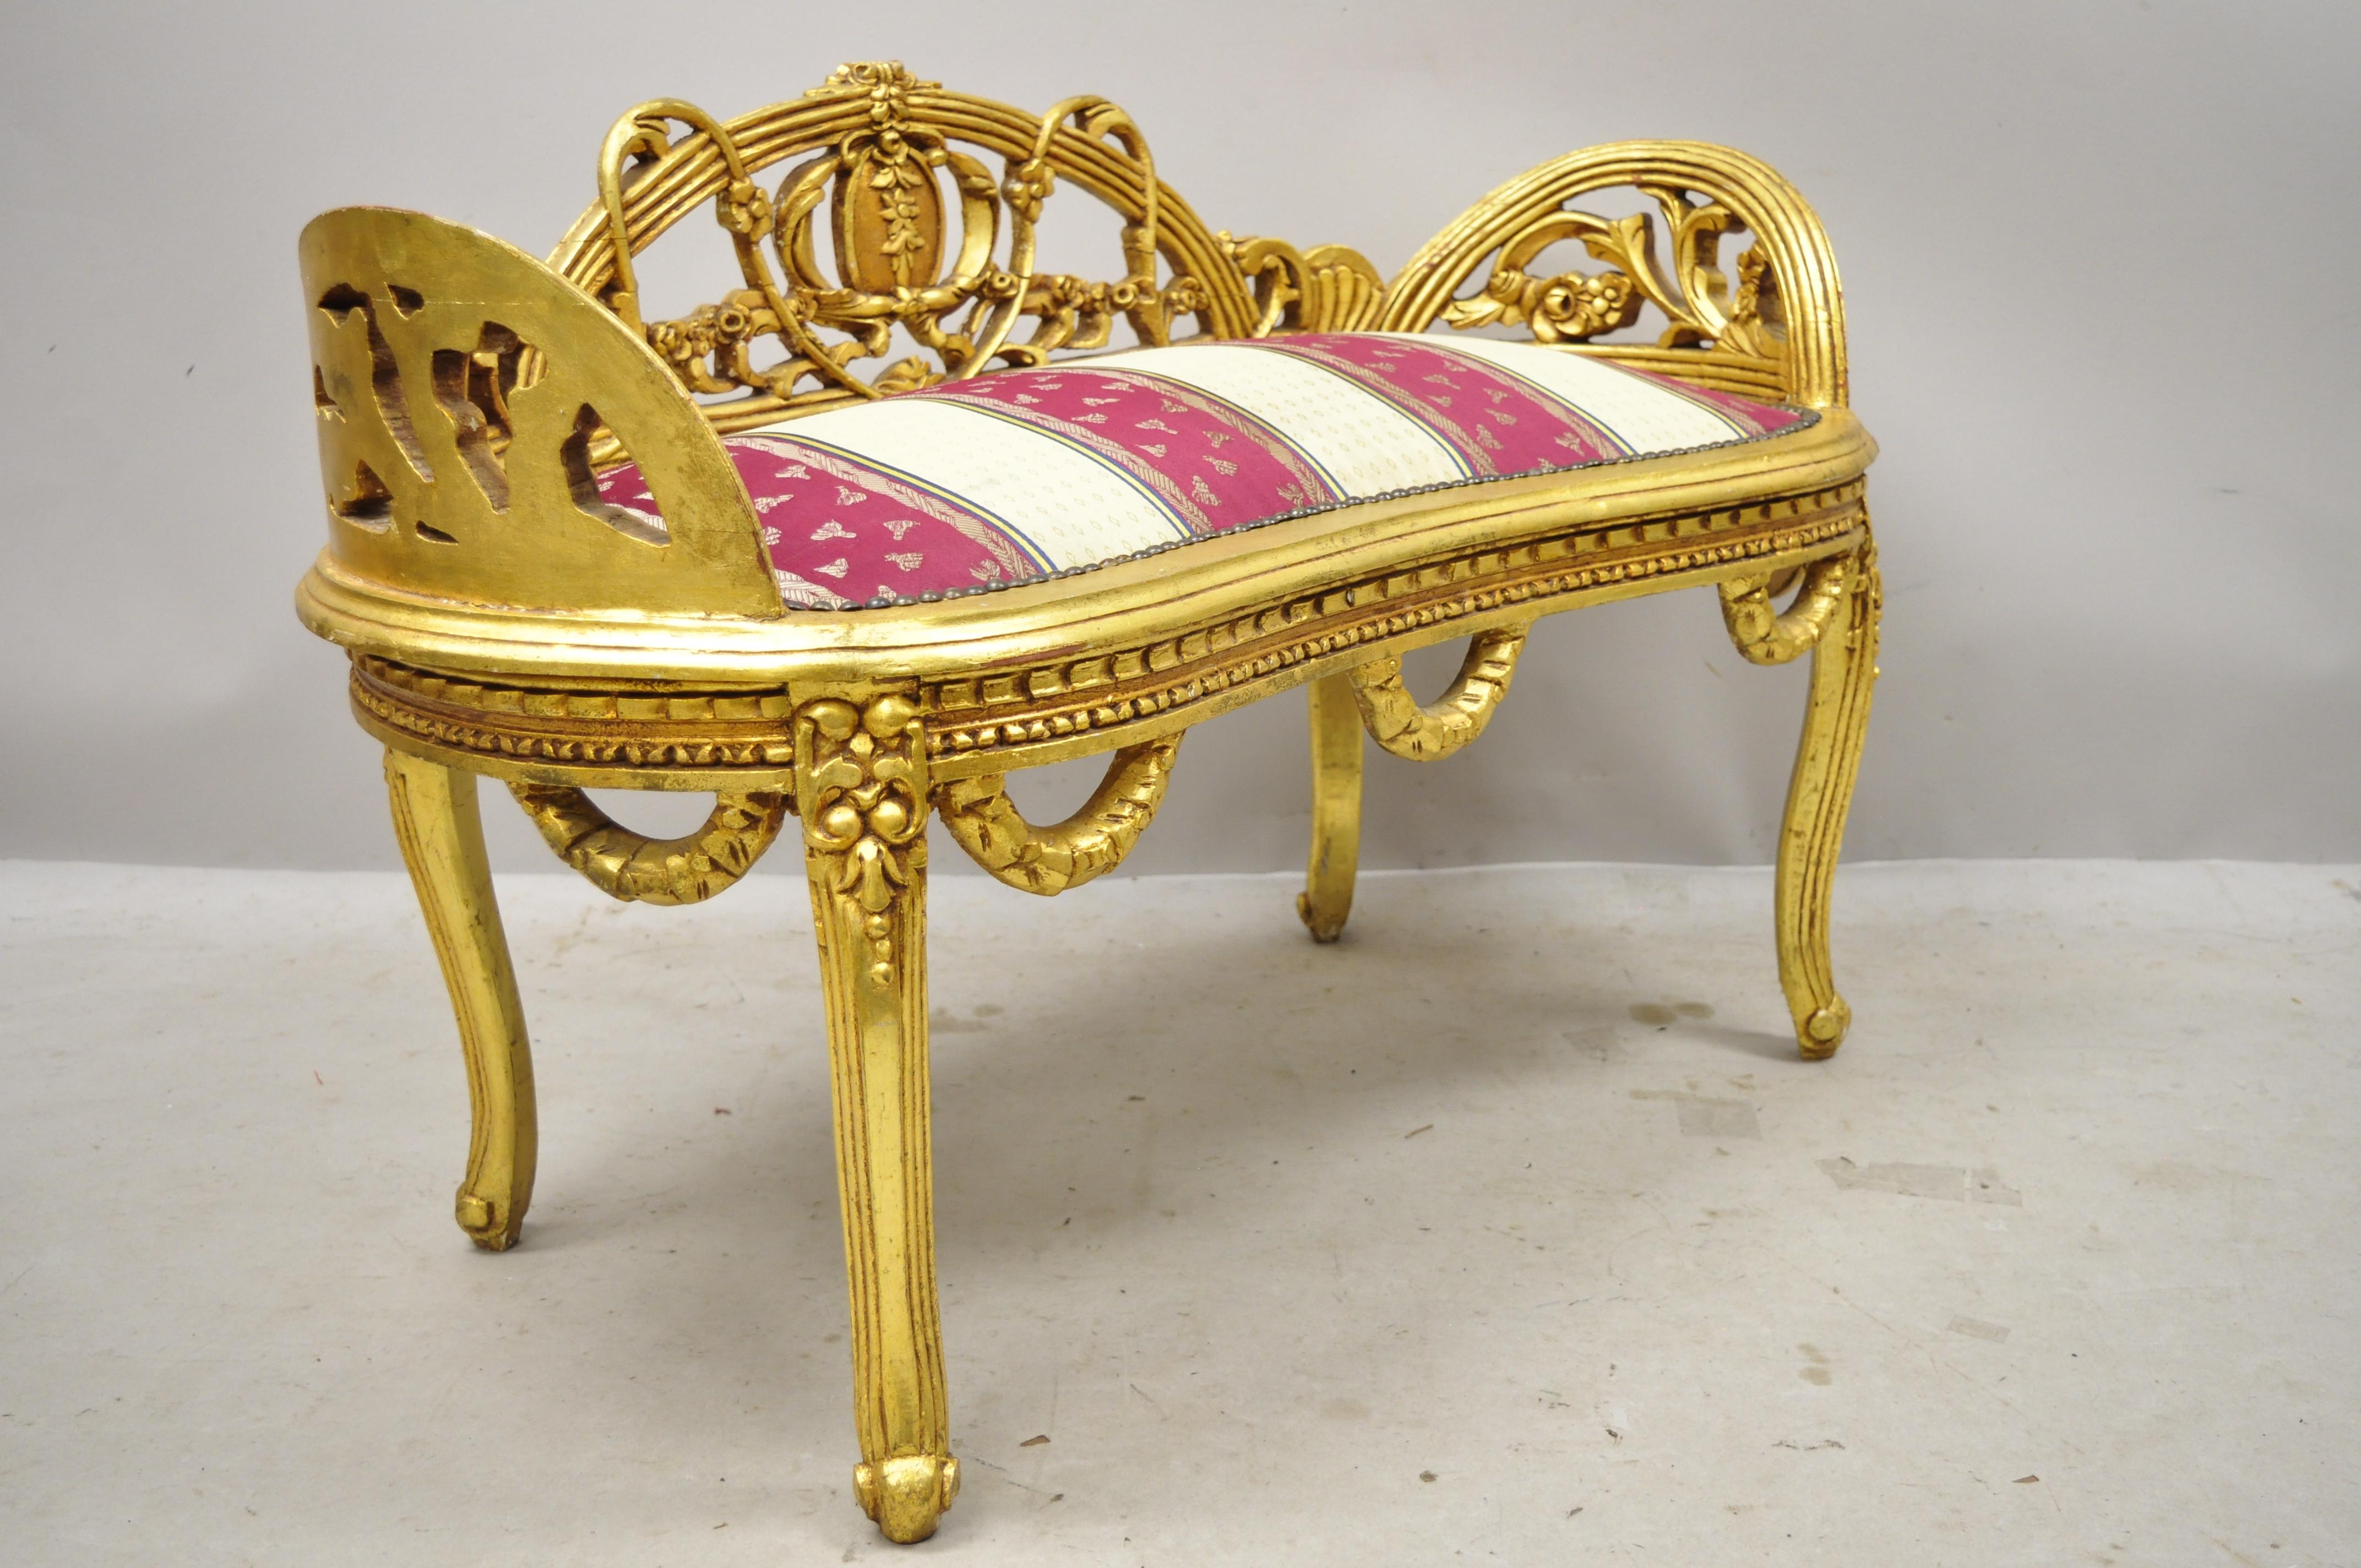 Vintage french Louis XV style gold giltwood kidney shape carved vanity bench. Item features gold gilt finish, ornately carved frame, solid wood frame, nicely carved details, cabriole legs, very nice vintage item, great style and form, circa late